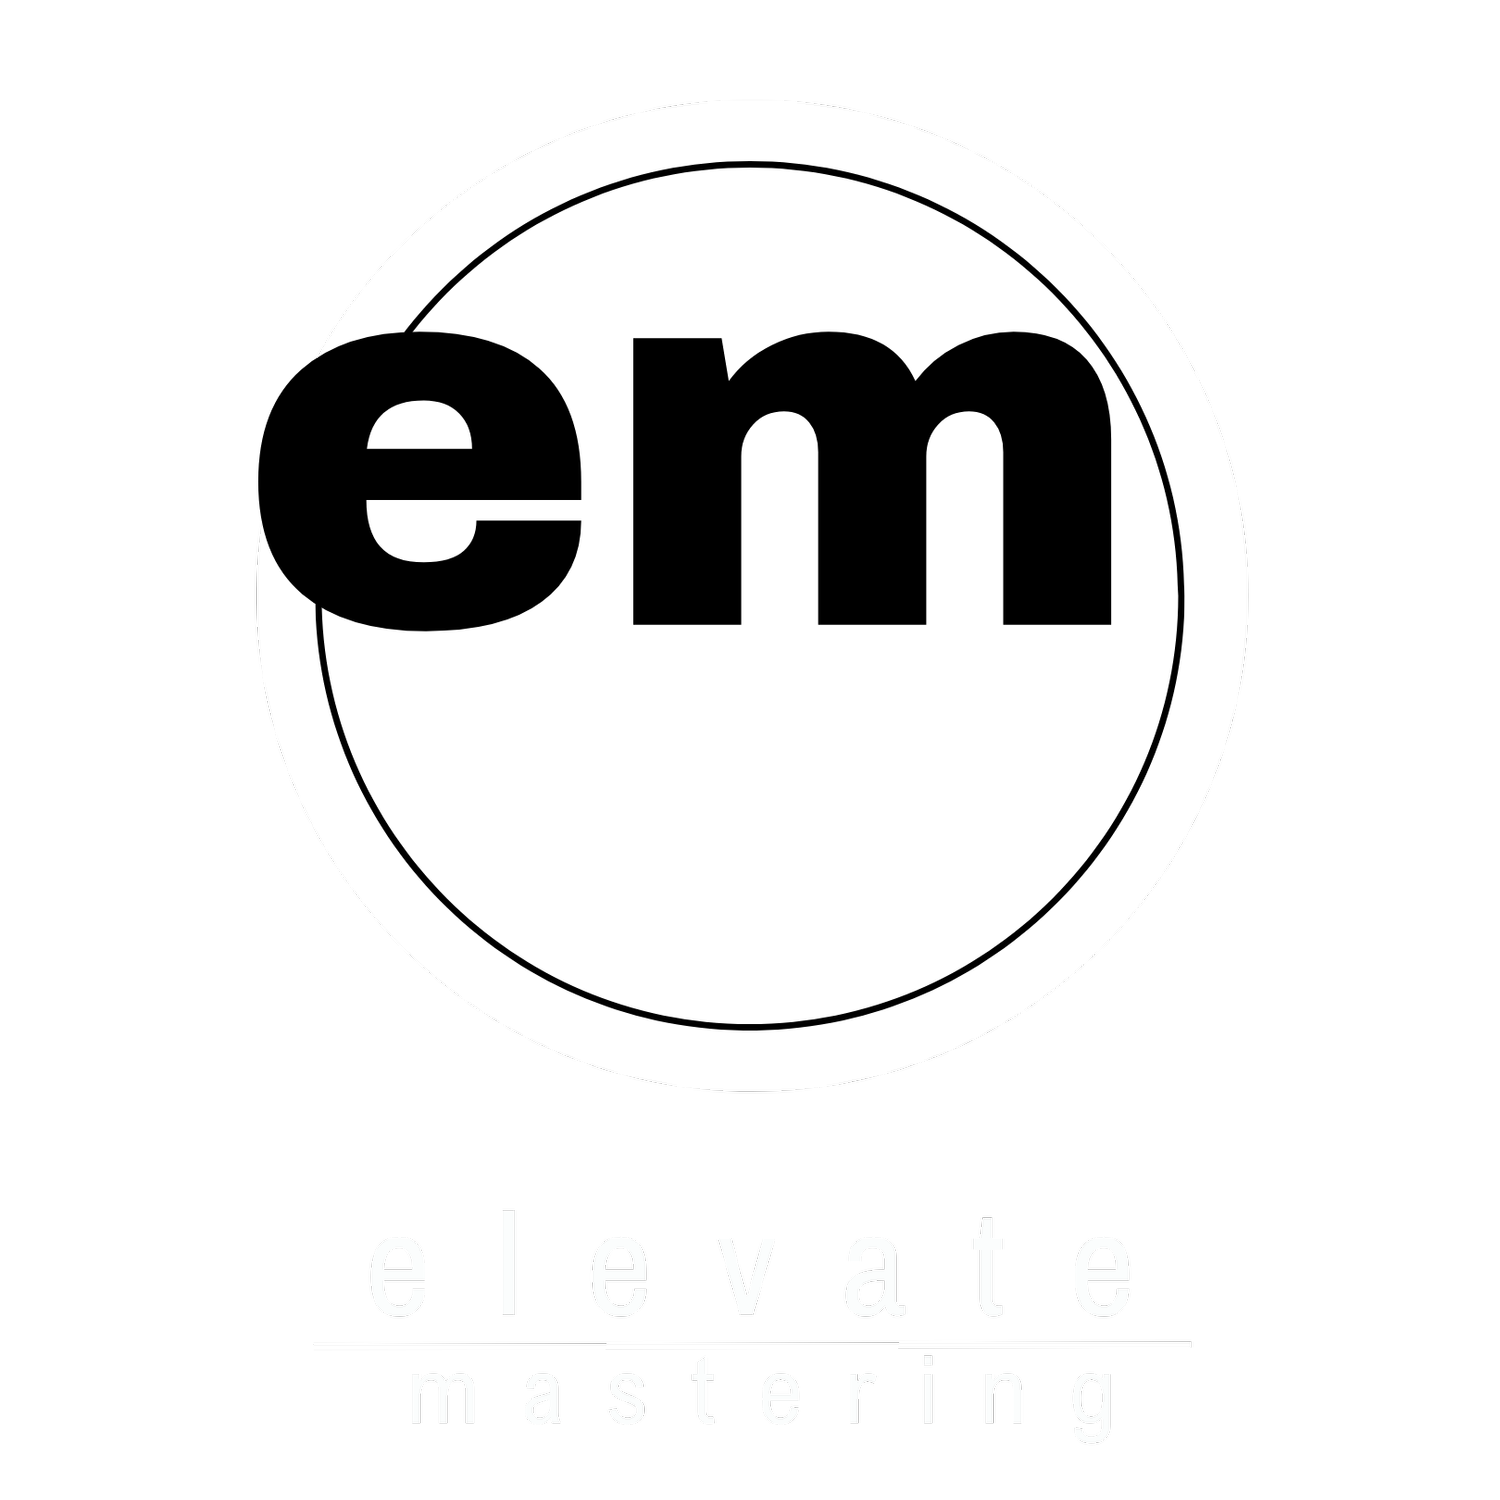 Elevate Mastering - Analog Online Mastering Services, Gear Reviews and Tutorials